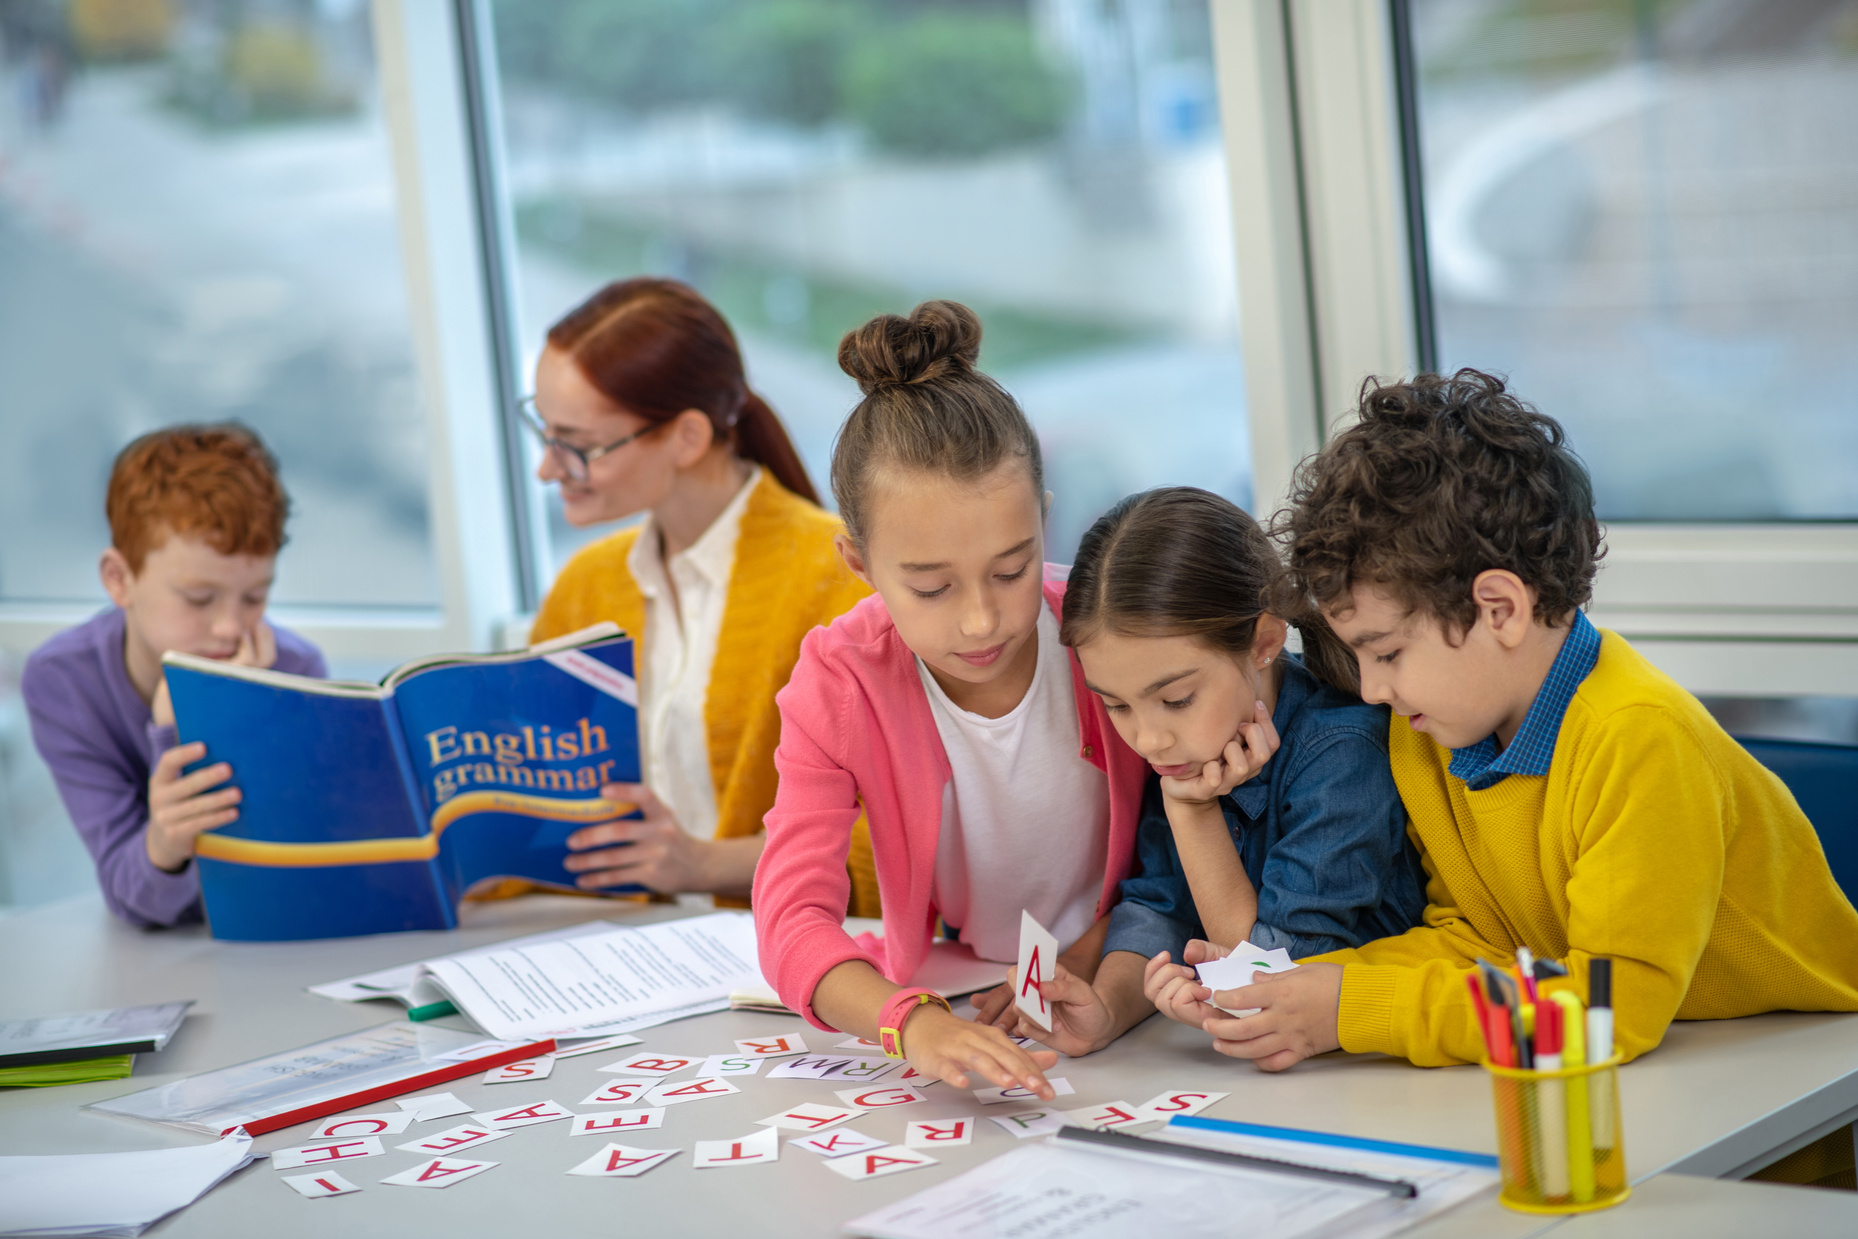 Concentrated children learning English grammar at school